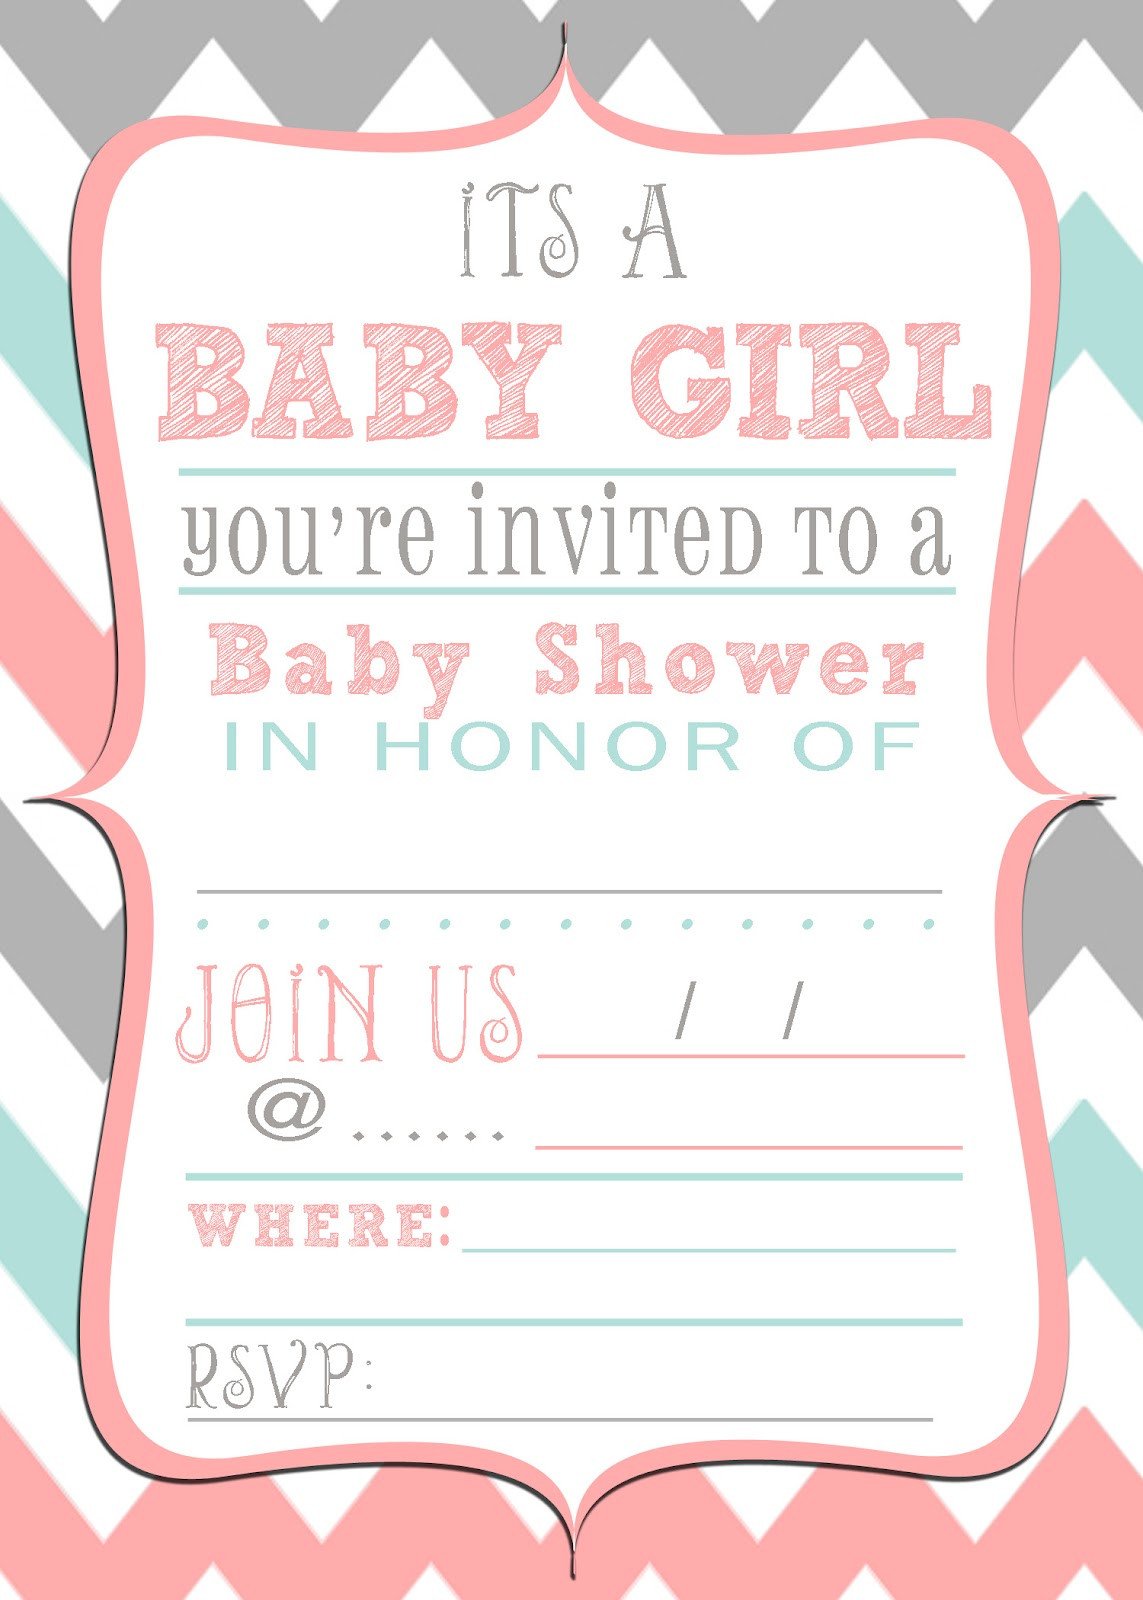 Baby Shower Invitation Free Template Mrs This and that Baby Shower Banner Free Downloads